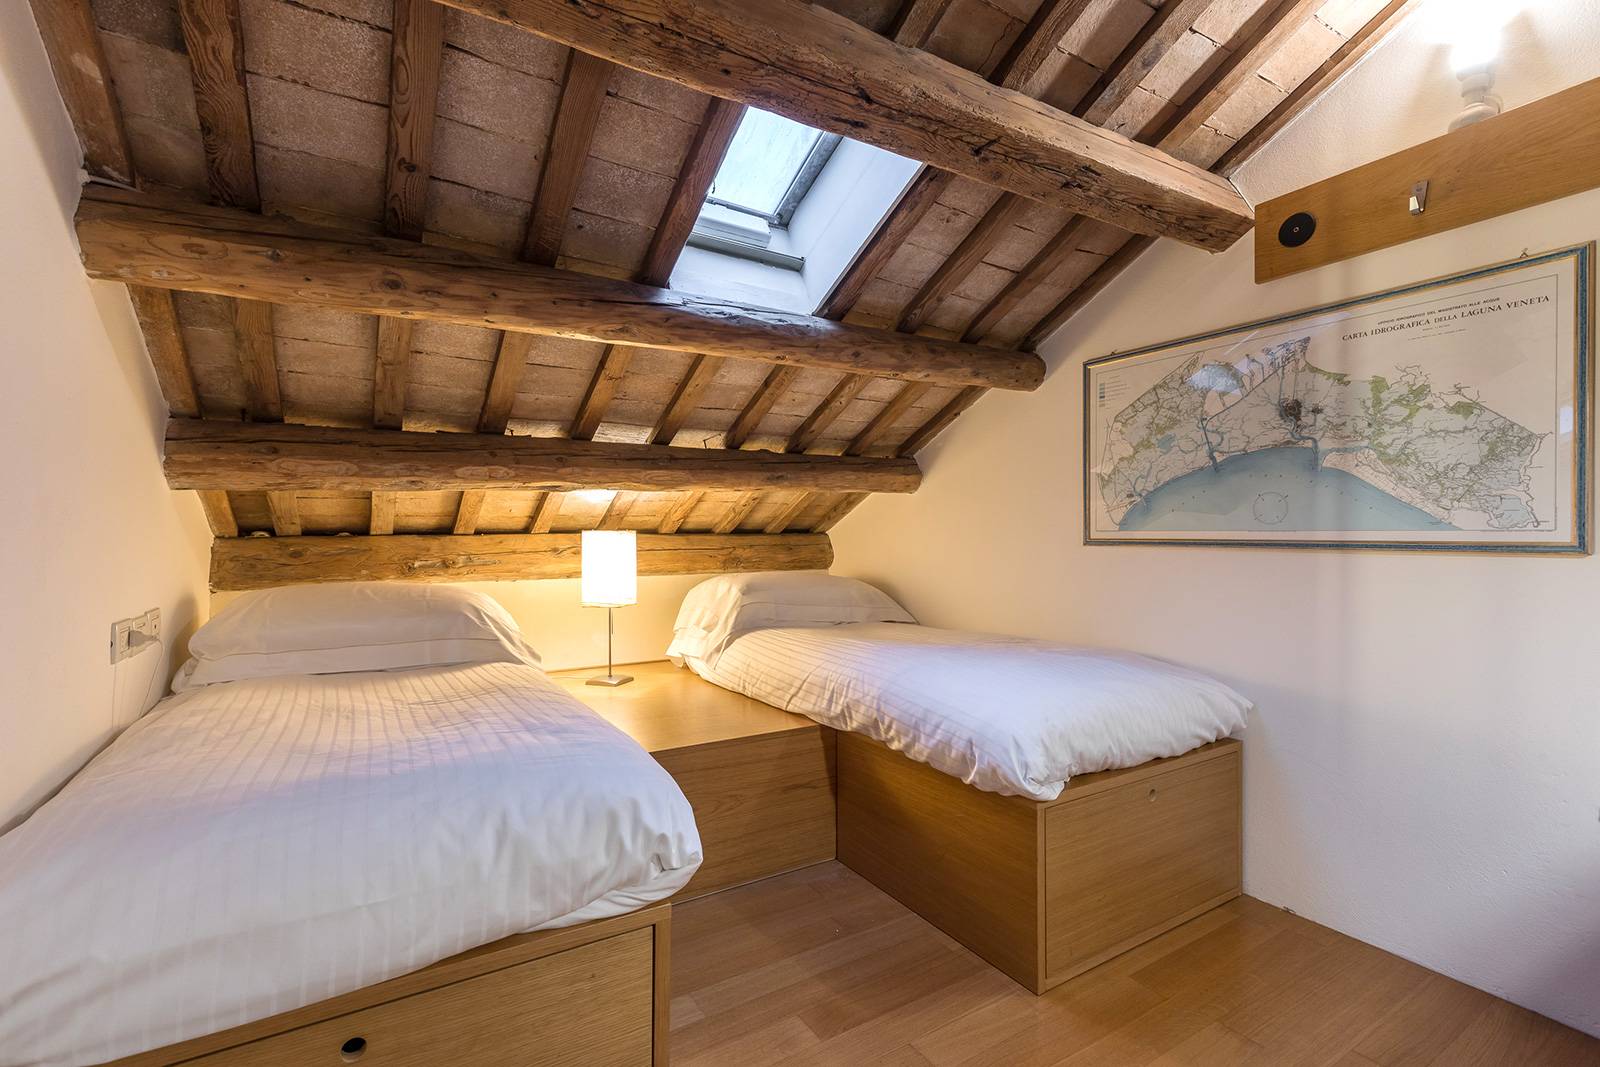 in the attic room there is a large futon that can be used as 2 single beds...